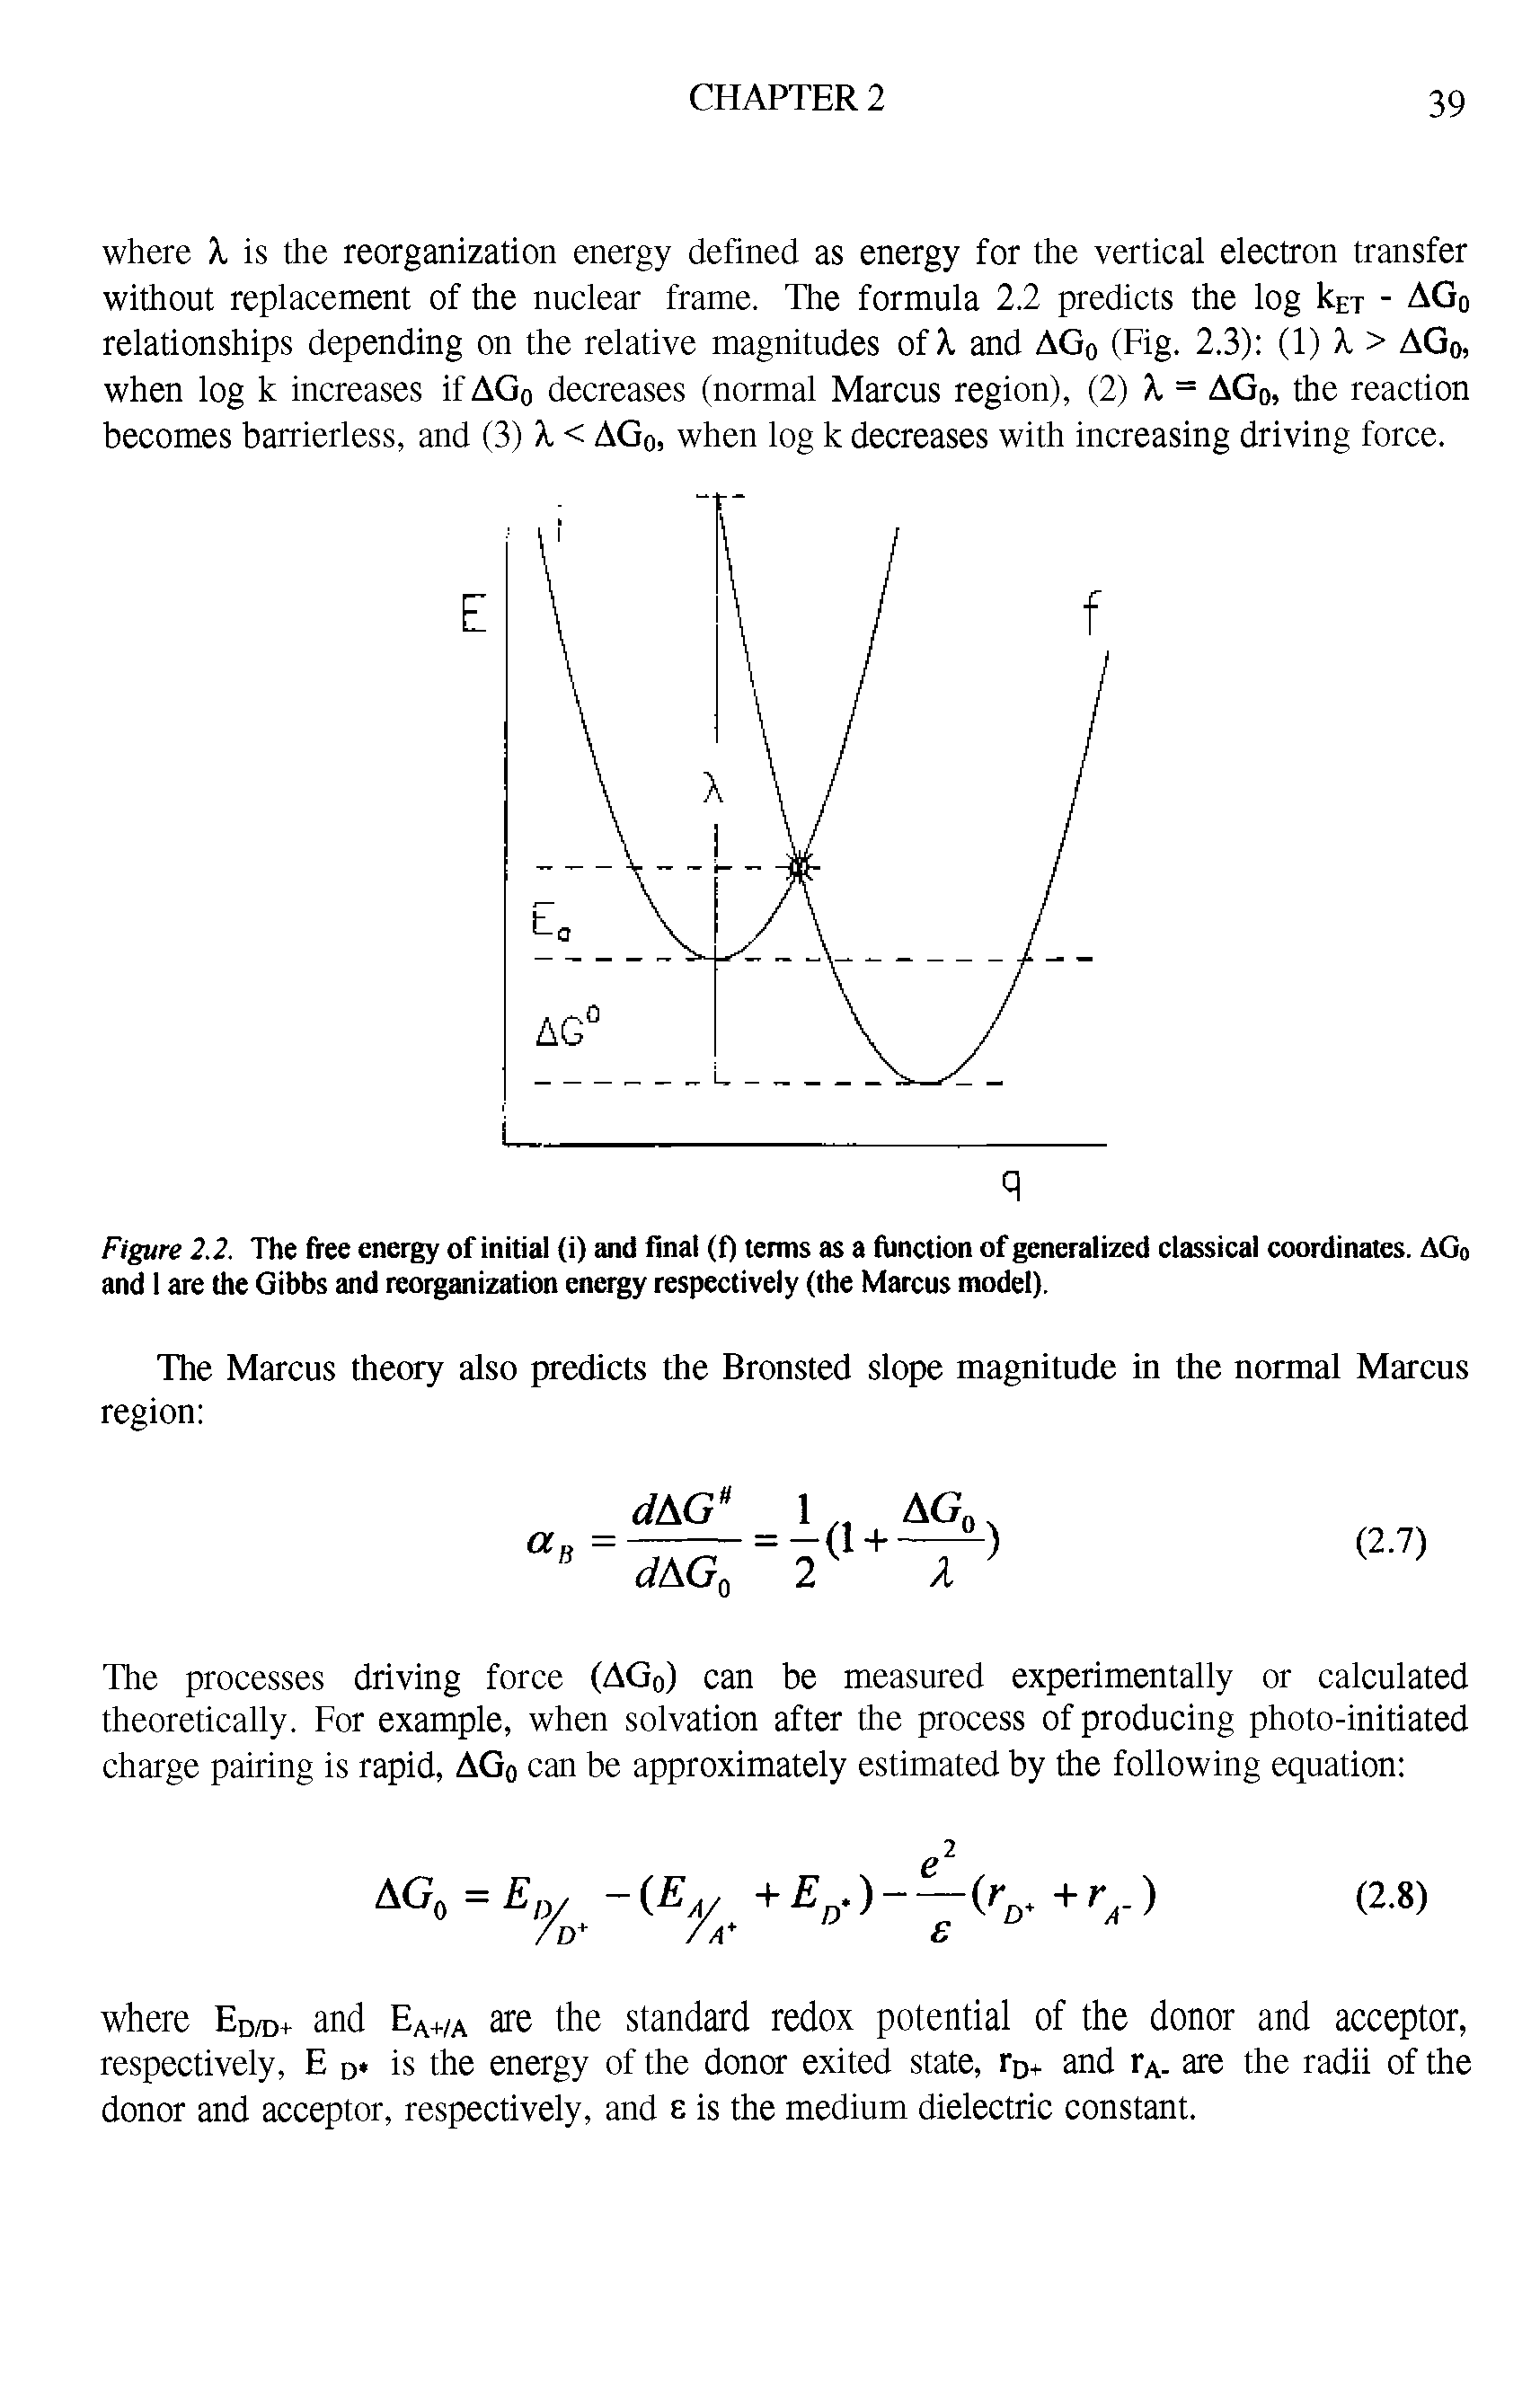 Figure 2.2. The free energy of initial (i) and final (f) terms as a function of generalized classical coordinates. AG0 and 1 are the Gibbs and reorganization energy respectively (the Marcus model).